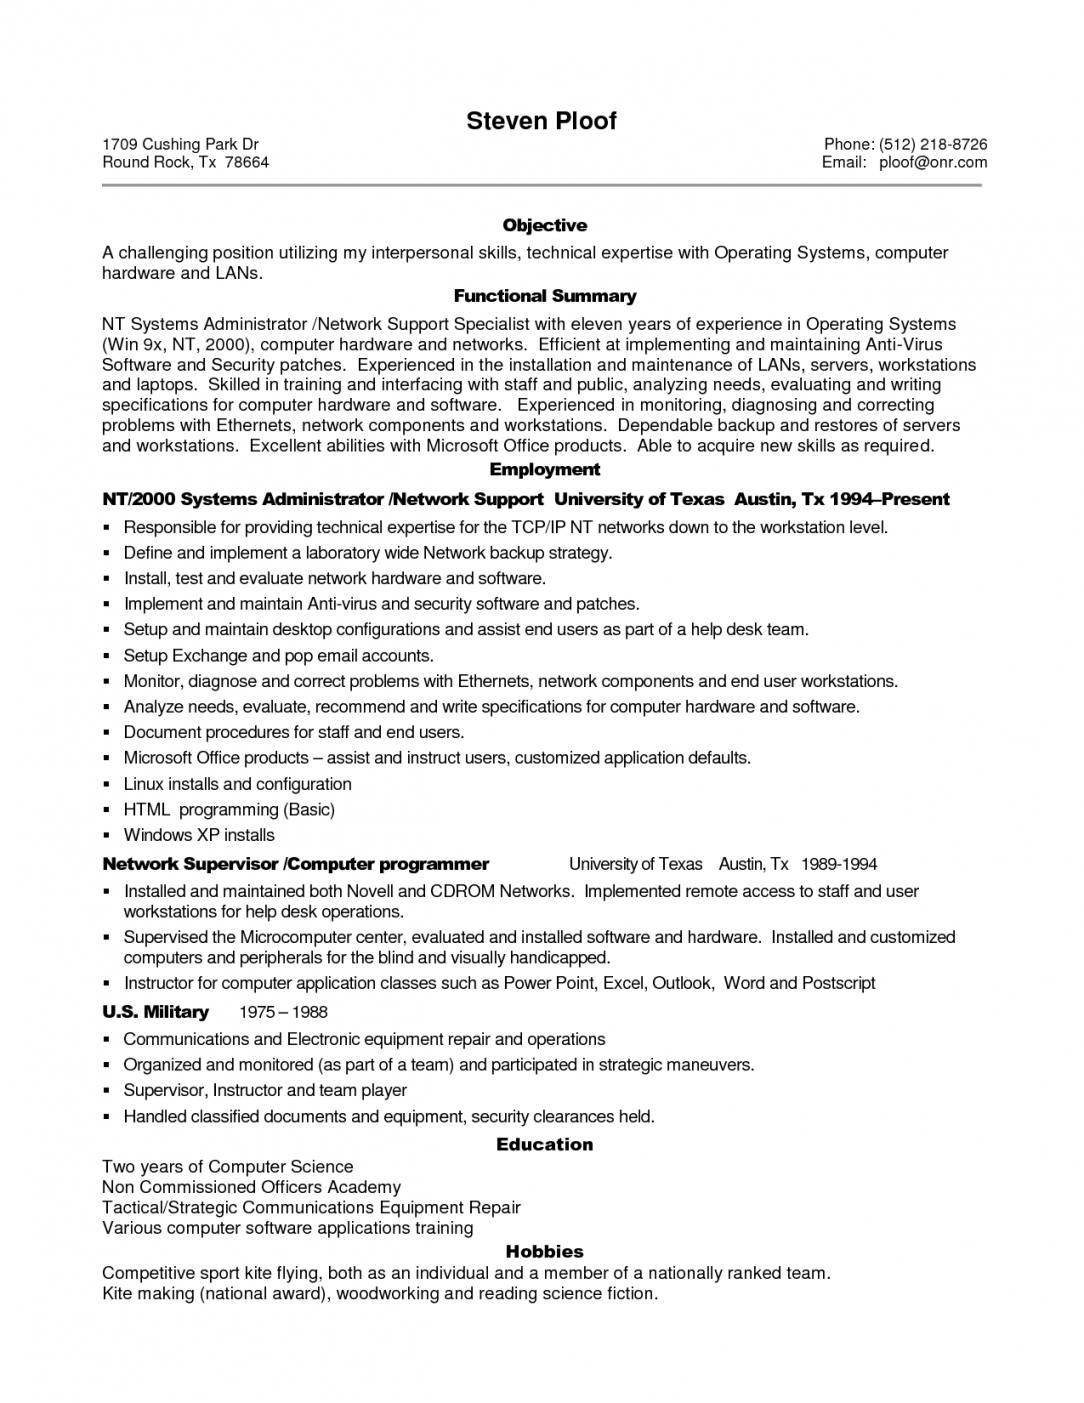 Professional Experience Resume Example